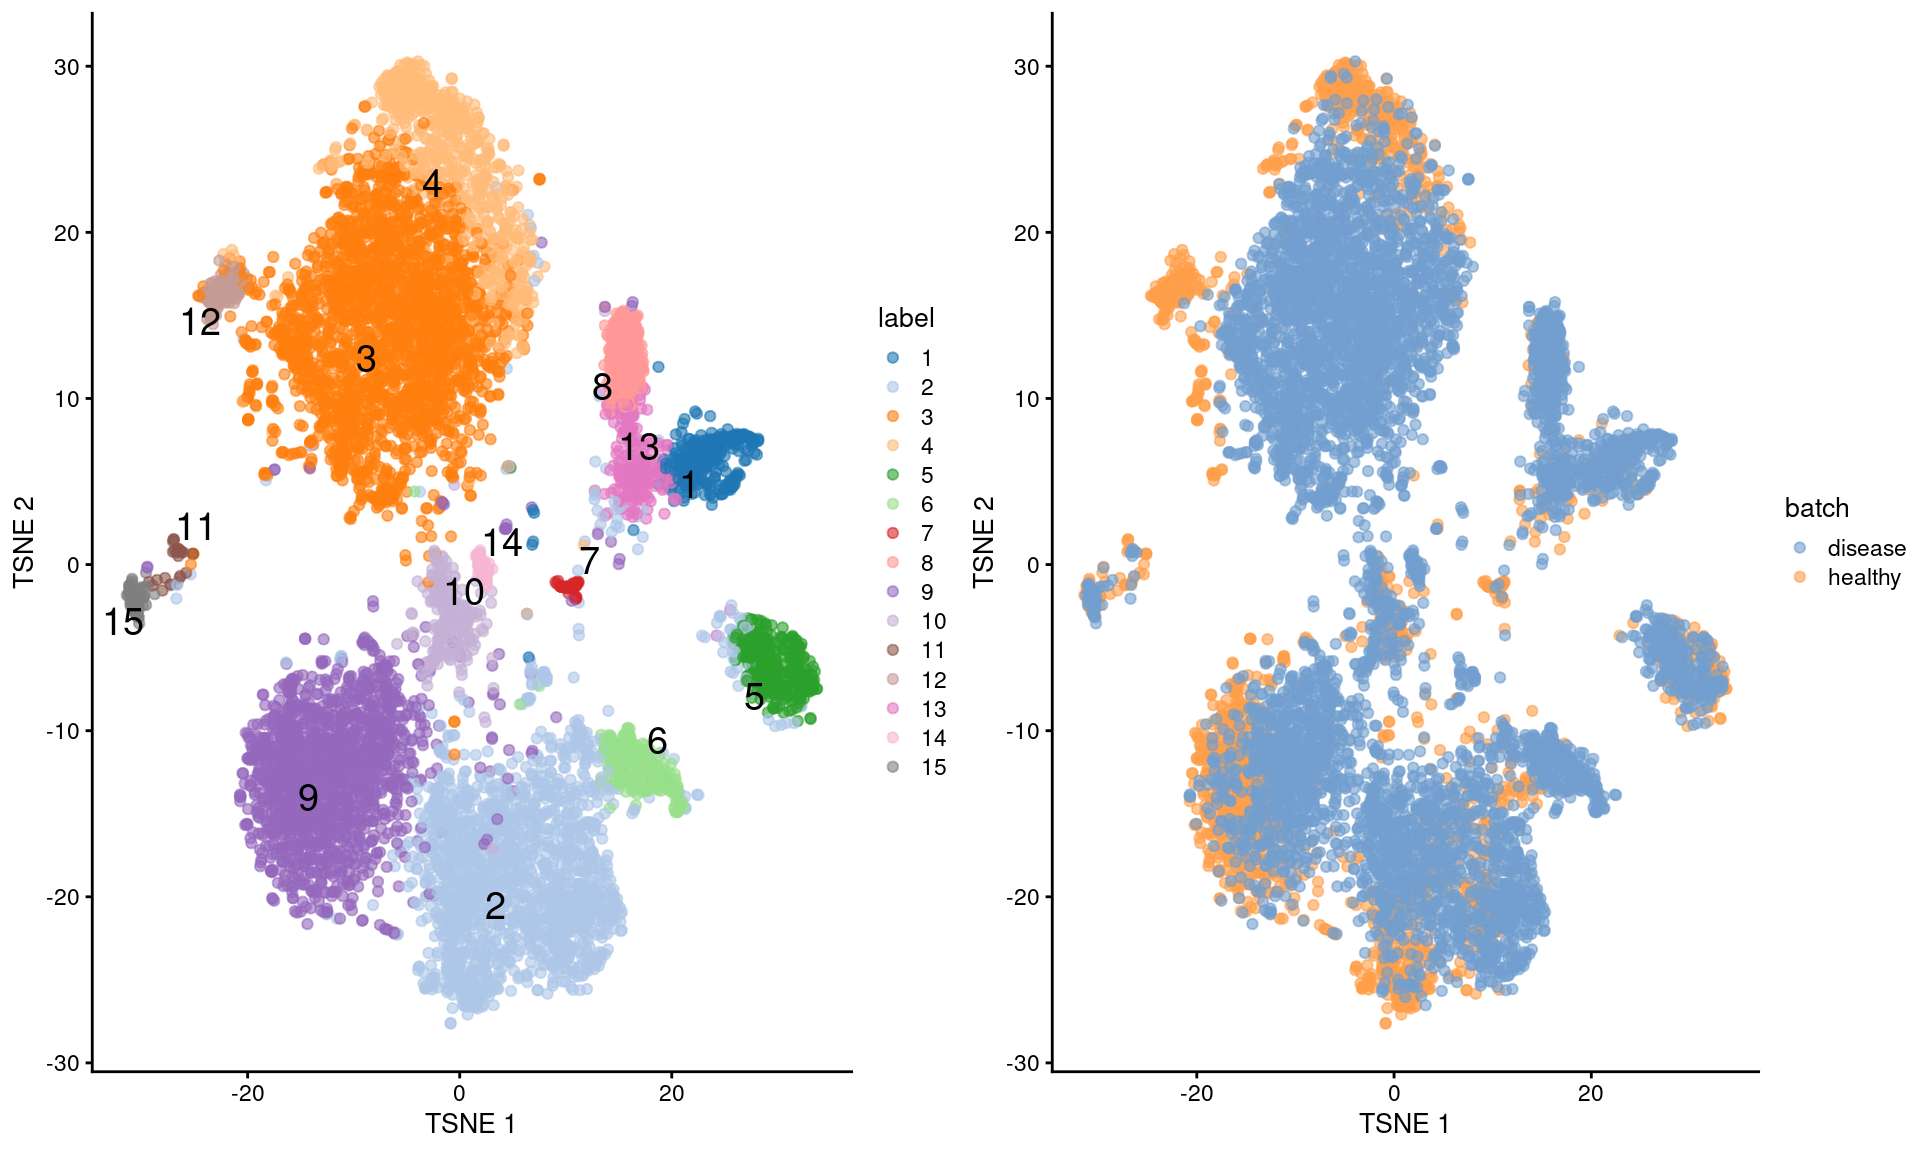 More $t$-SNE plots of the Wu kidney dataset after applying MNN correction across diseases.